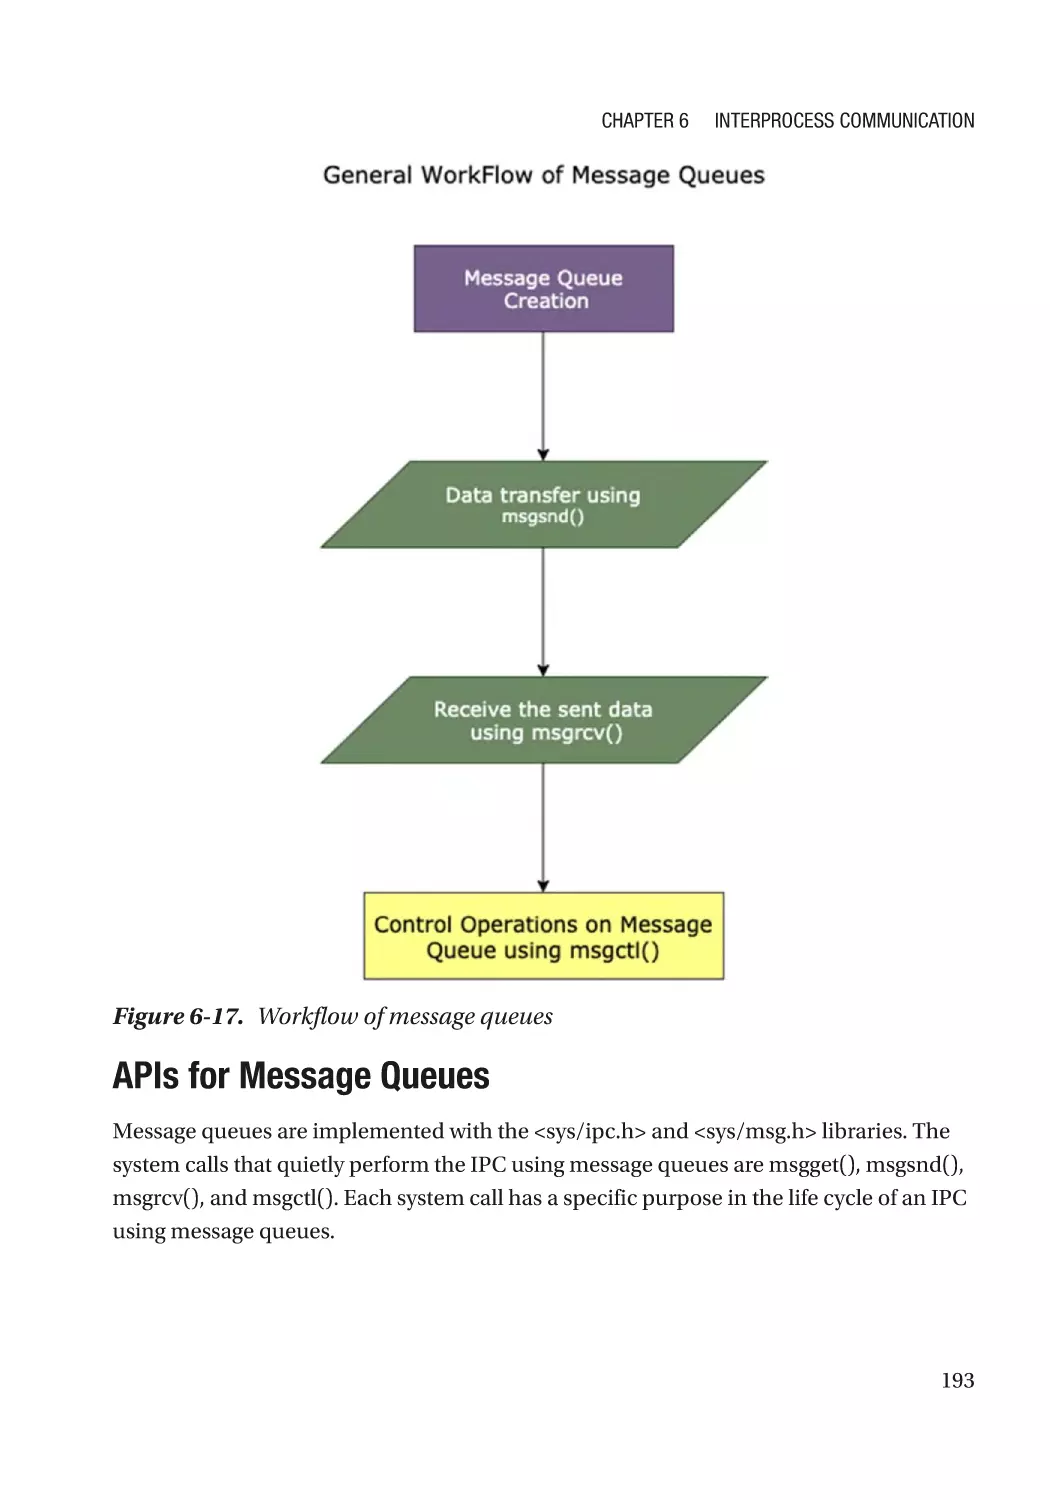 APIs for Message Queues